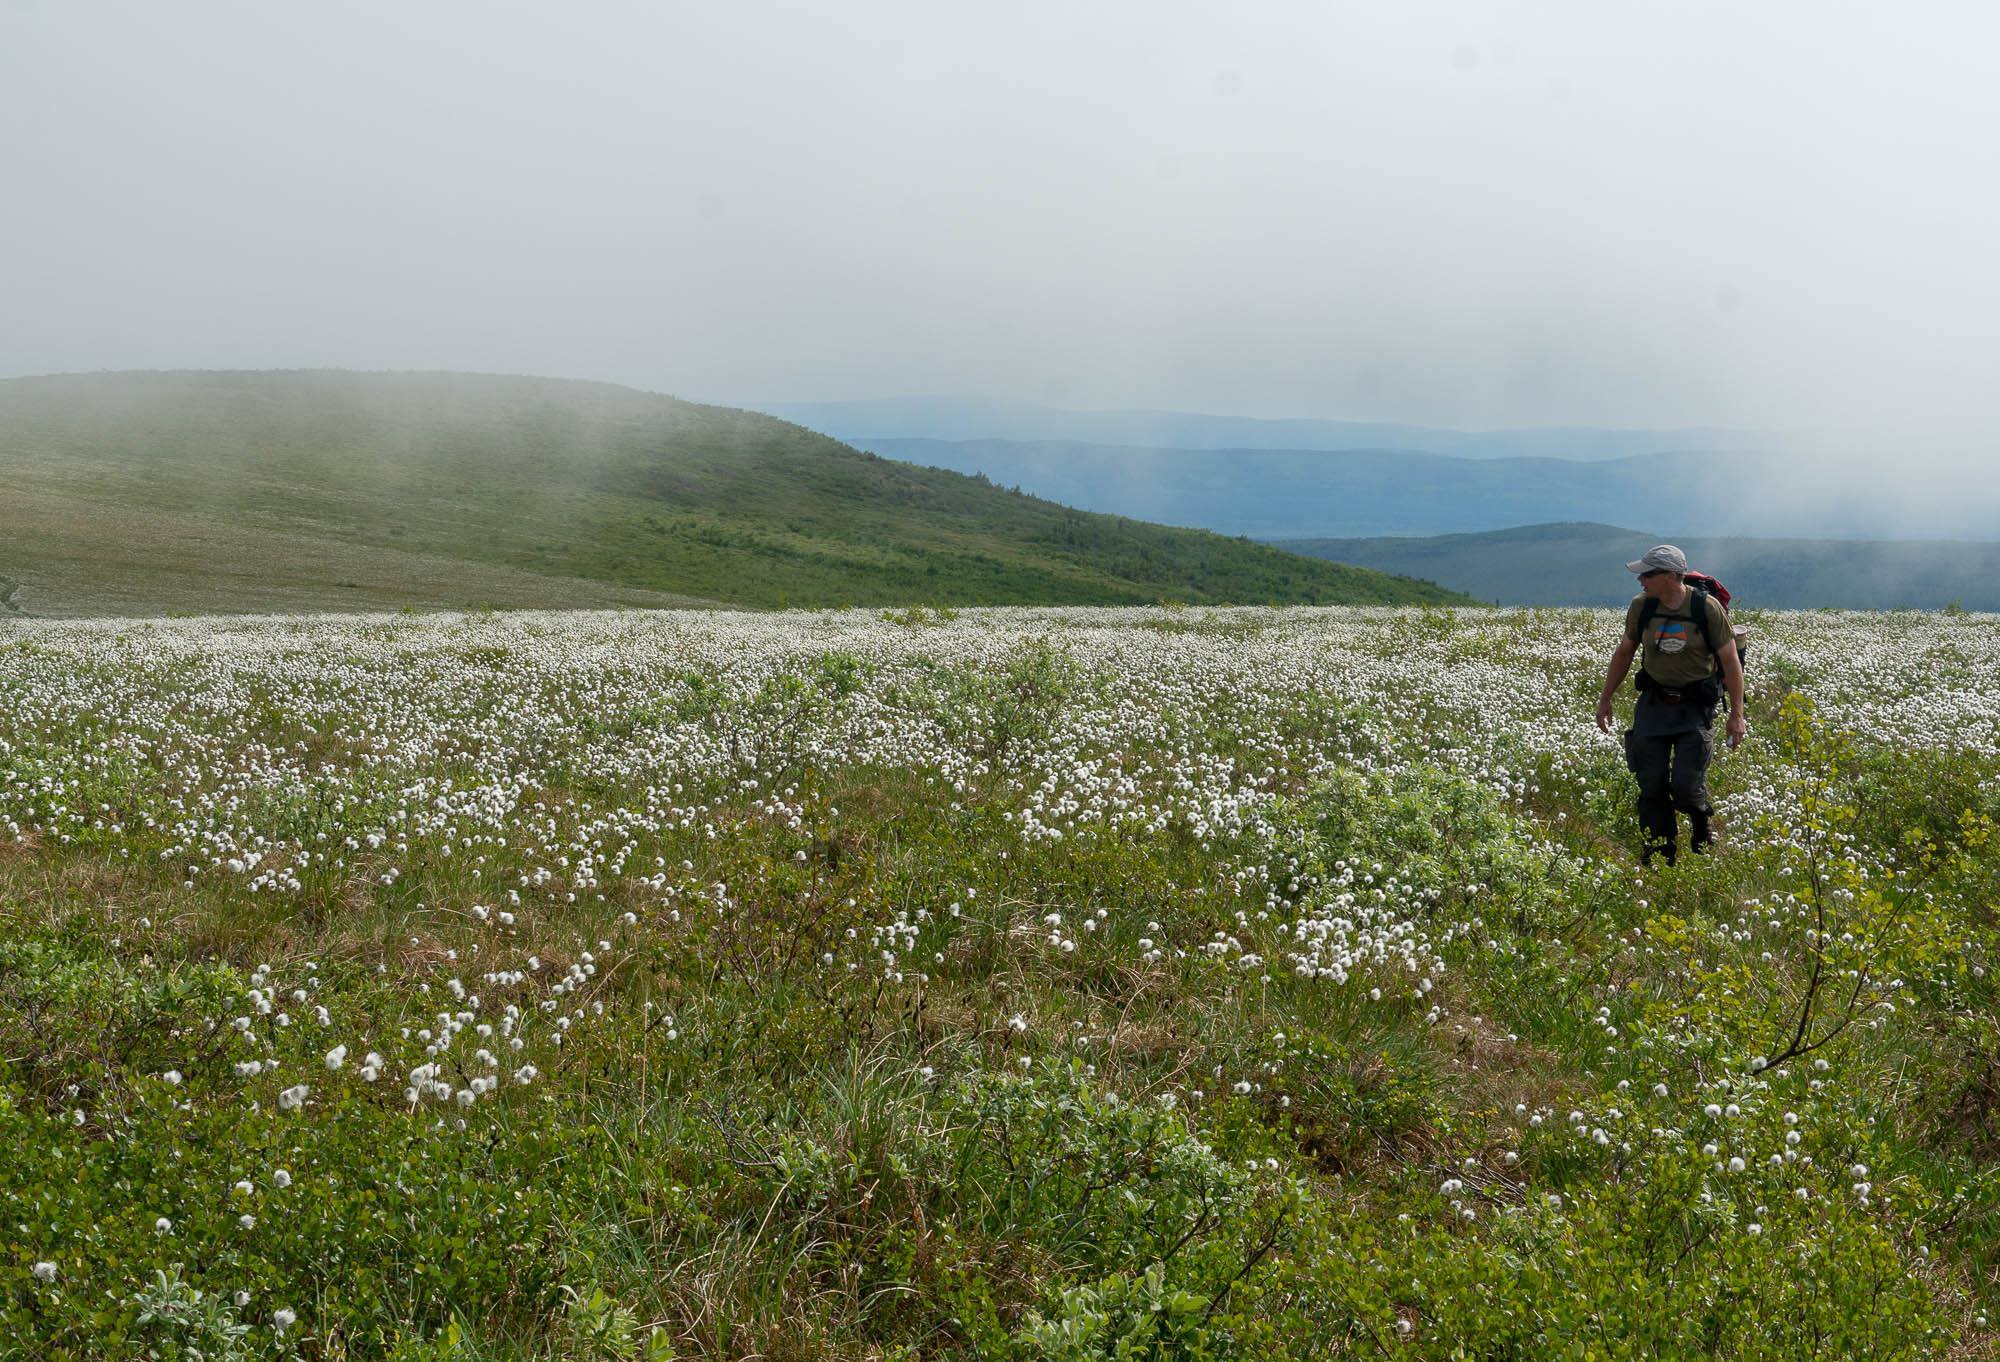 A man walks across a tundra field blanketed with cottongrass, which forms 2-inch balls of white fluff at the tops of its stalks. Blue hills in the distance are slightly obscured by fog in the sky.